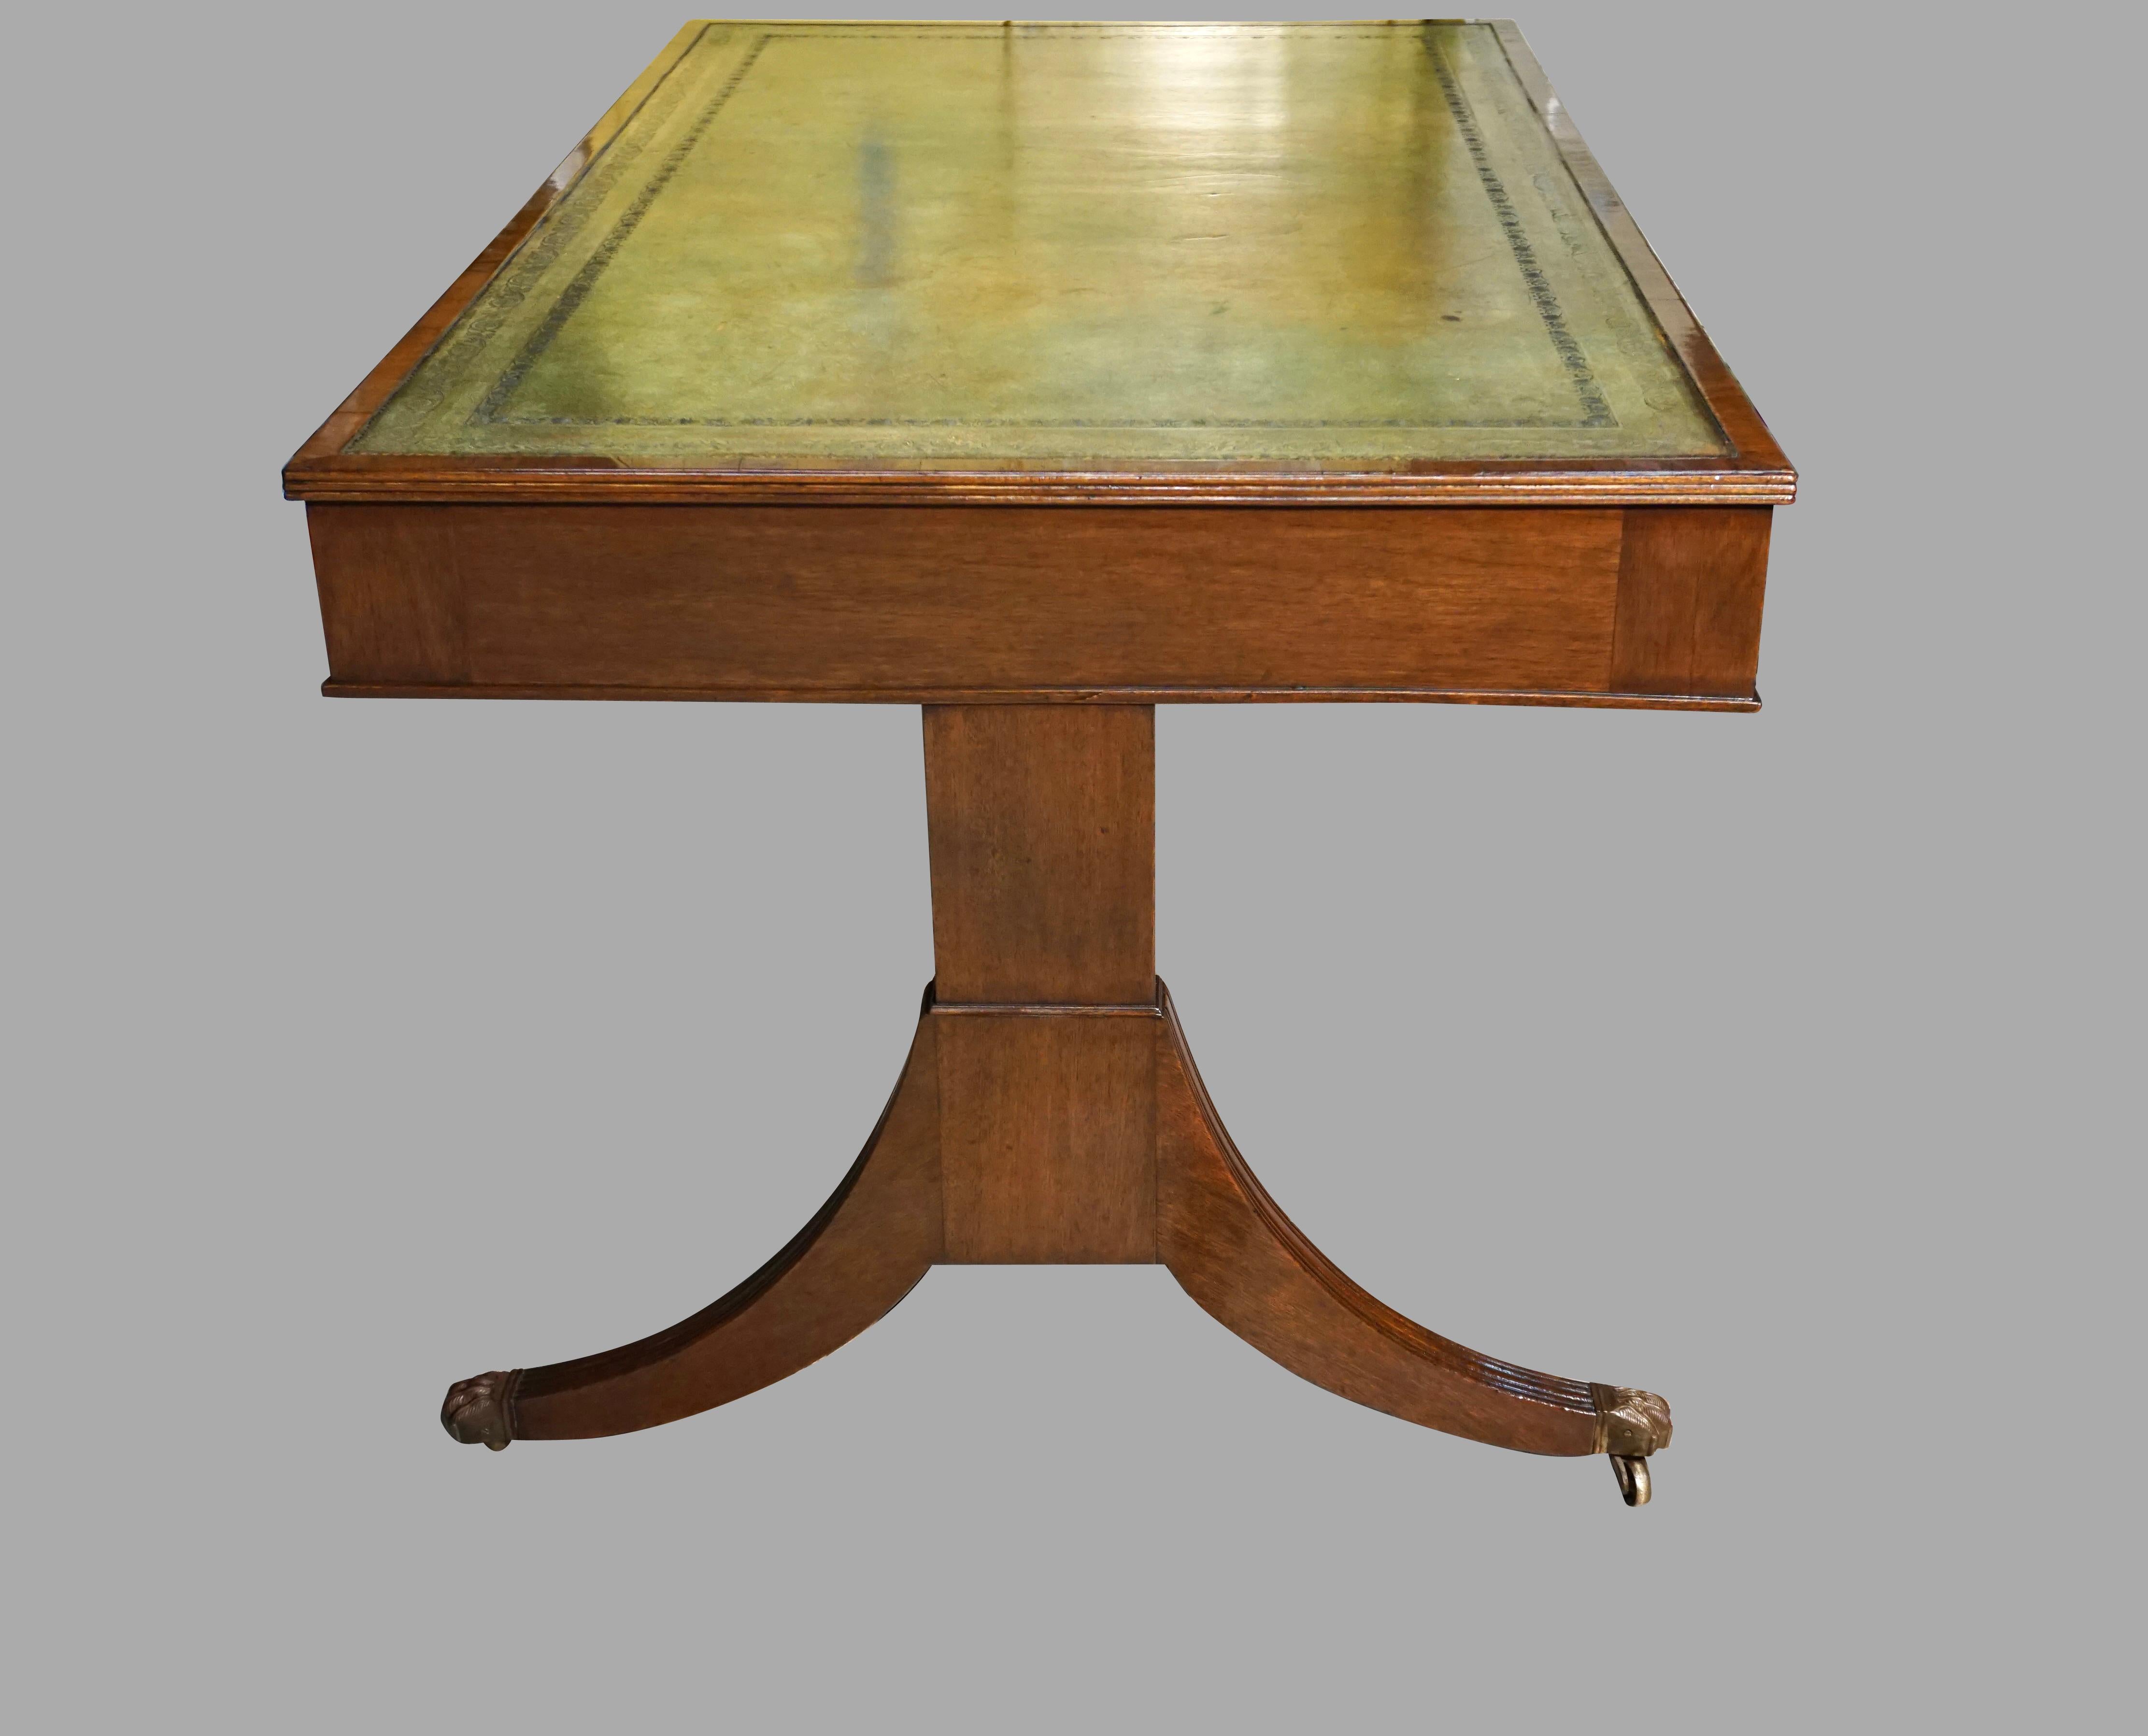 19th Century English Regency Style Mahogany Writing Table with Gilt-Tooled Leather Top For Sale